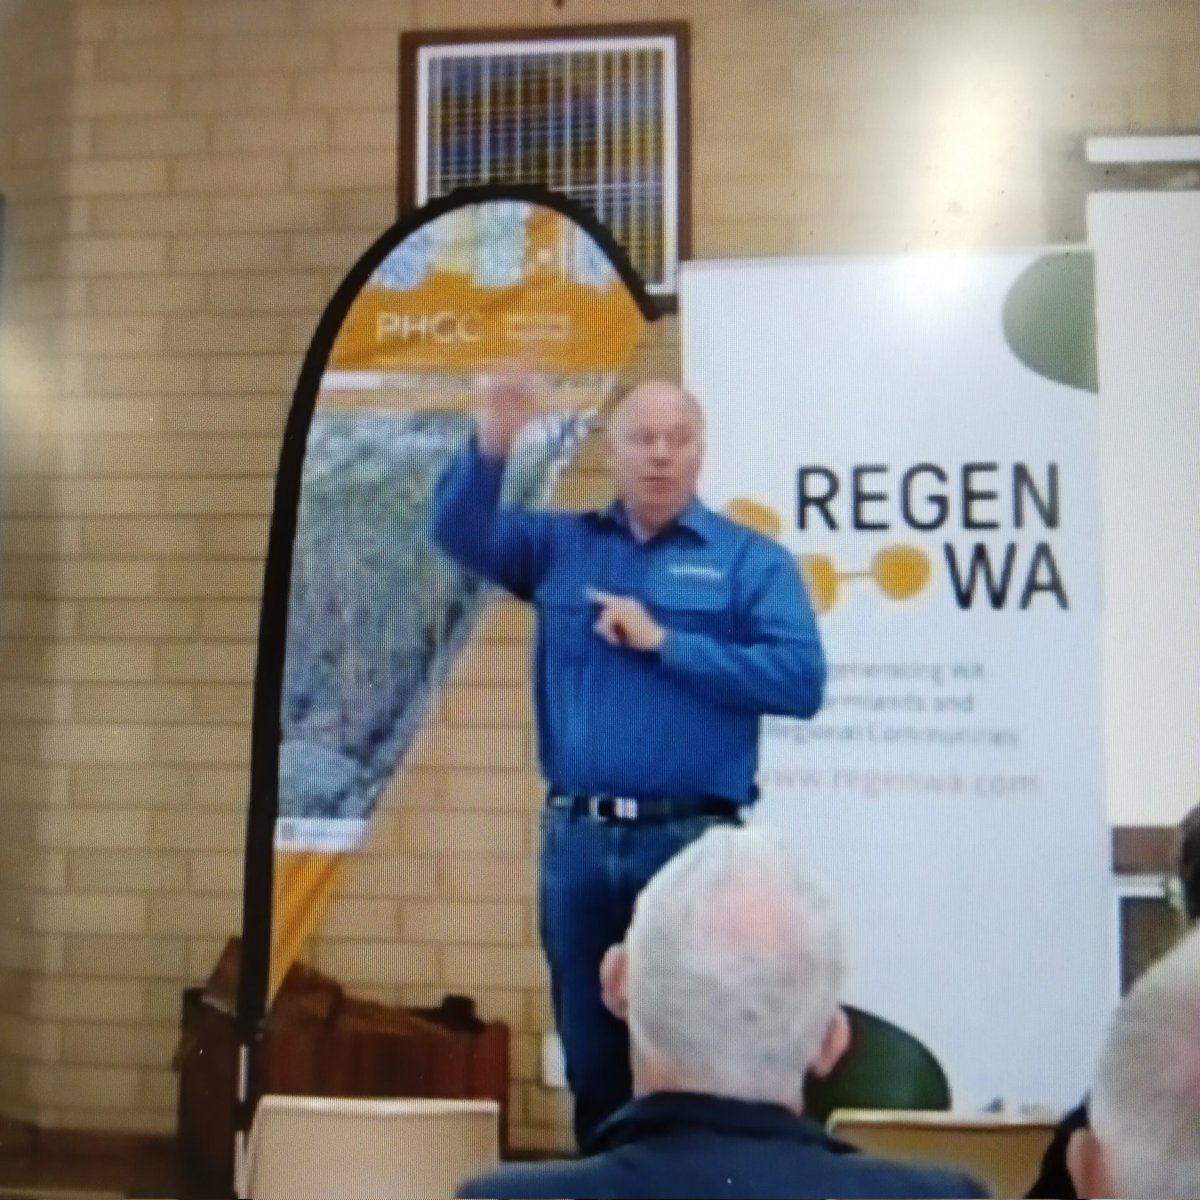 Hearing from Bruce Maynard today about supporting #regenerative land practices to support farm #businesses and #communities in the @PeelHarveyCC @RegenWa #WA_Regenerative_Livestock_Producers @AusLandcare @DAFFgov @NetworkLandcare @LandcareAust